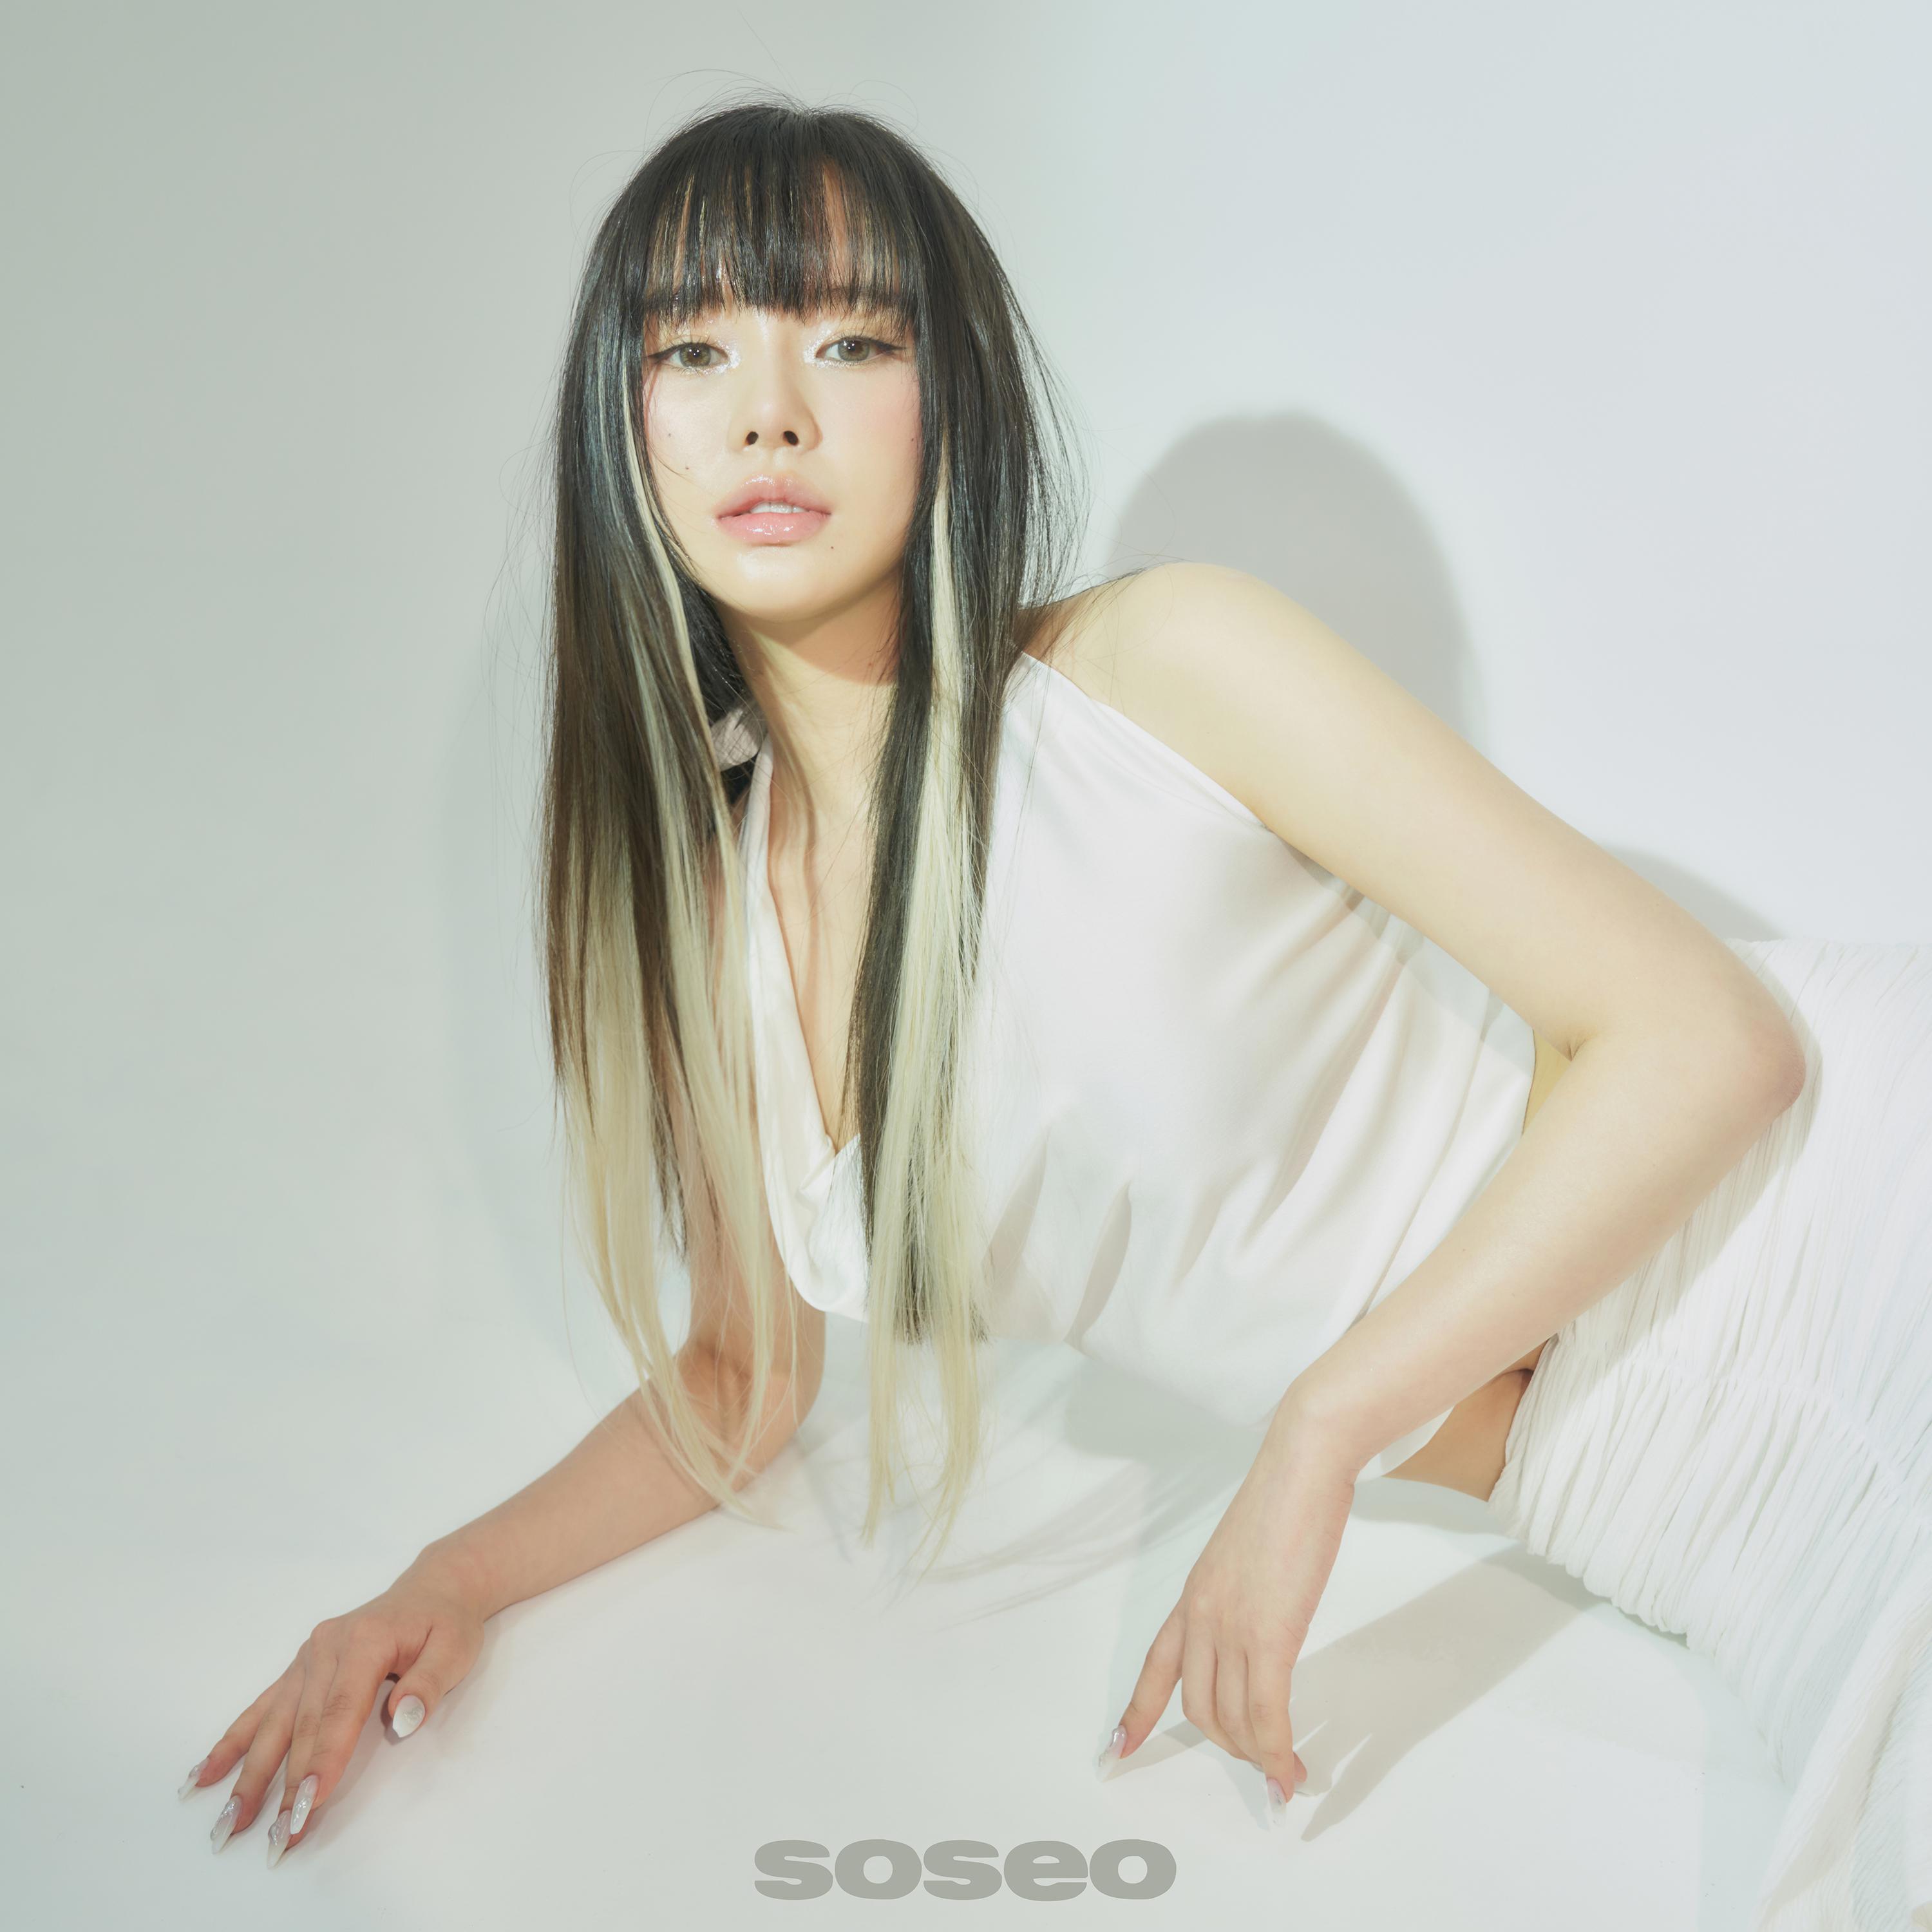 Soseo - You're Already The Best For Me